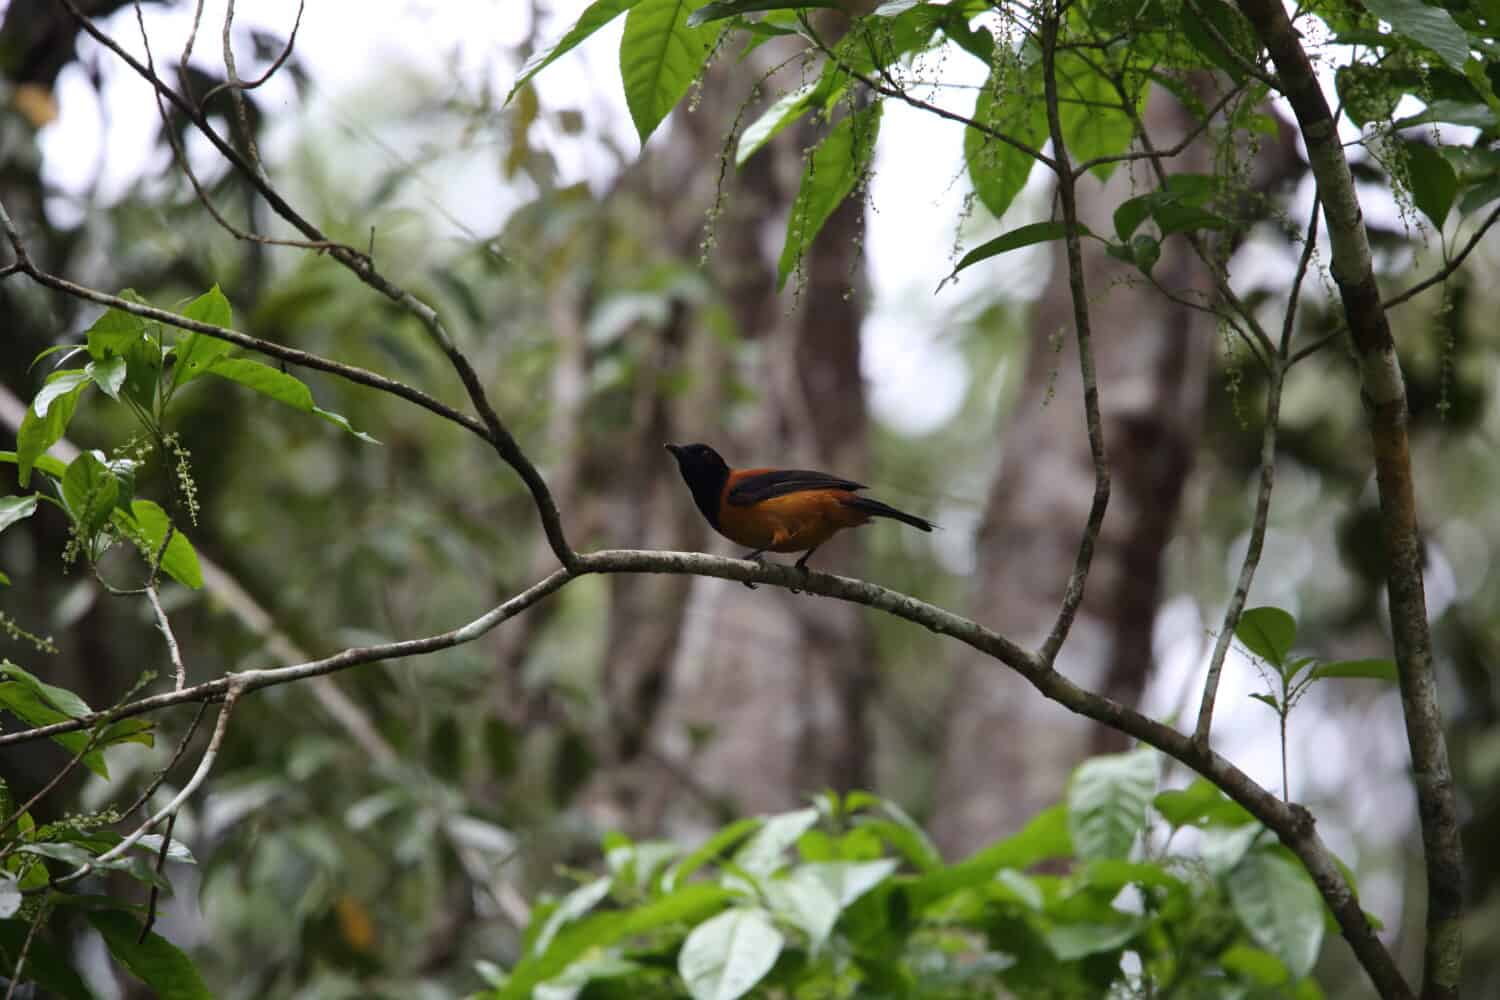 A distanced image of the orange and black hooded pitohui on a tree branch. 